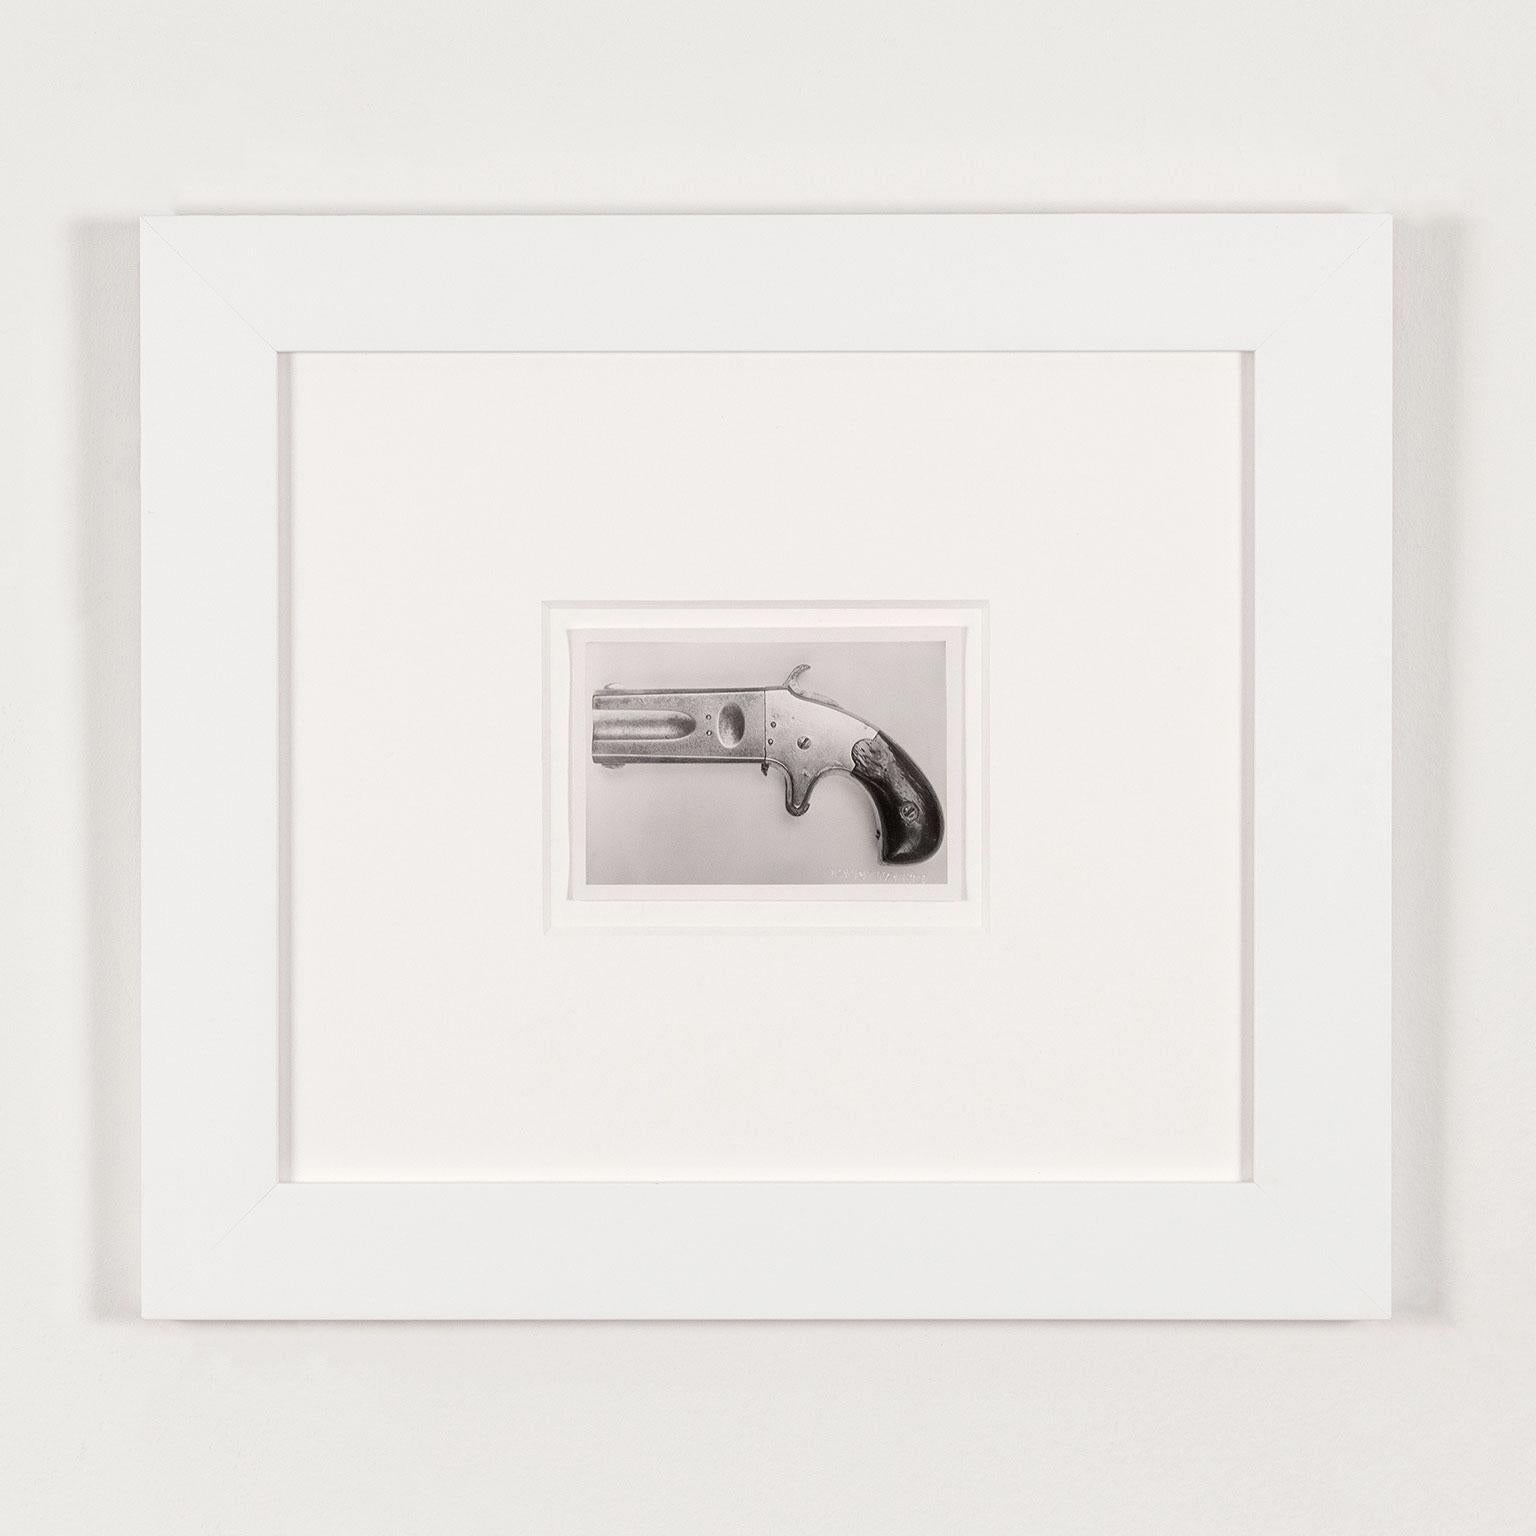 Andy Warhol Black and White Photograph - One Pistol 